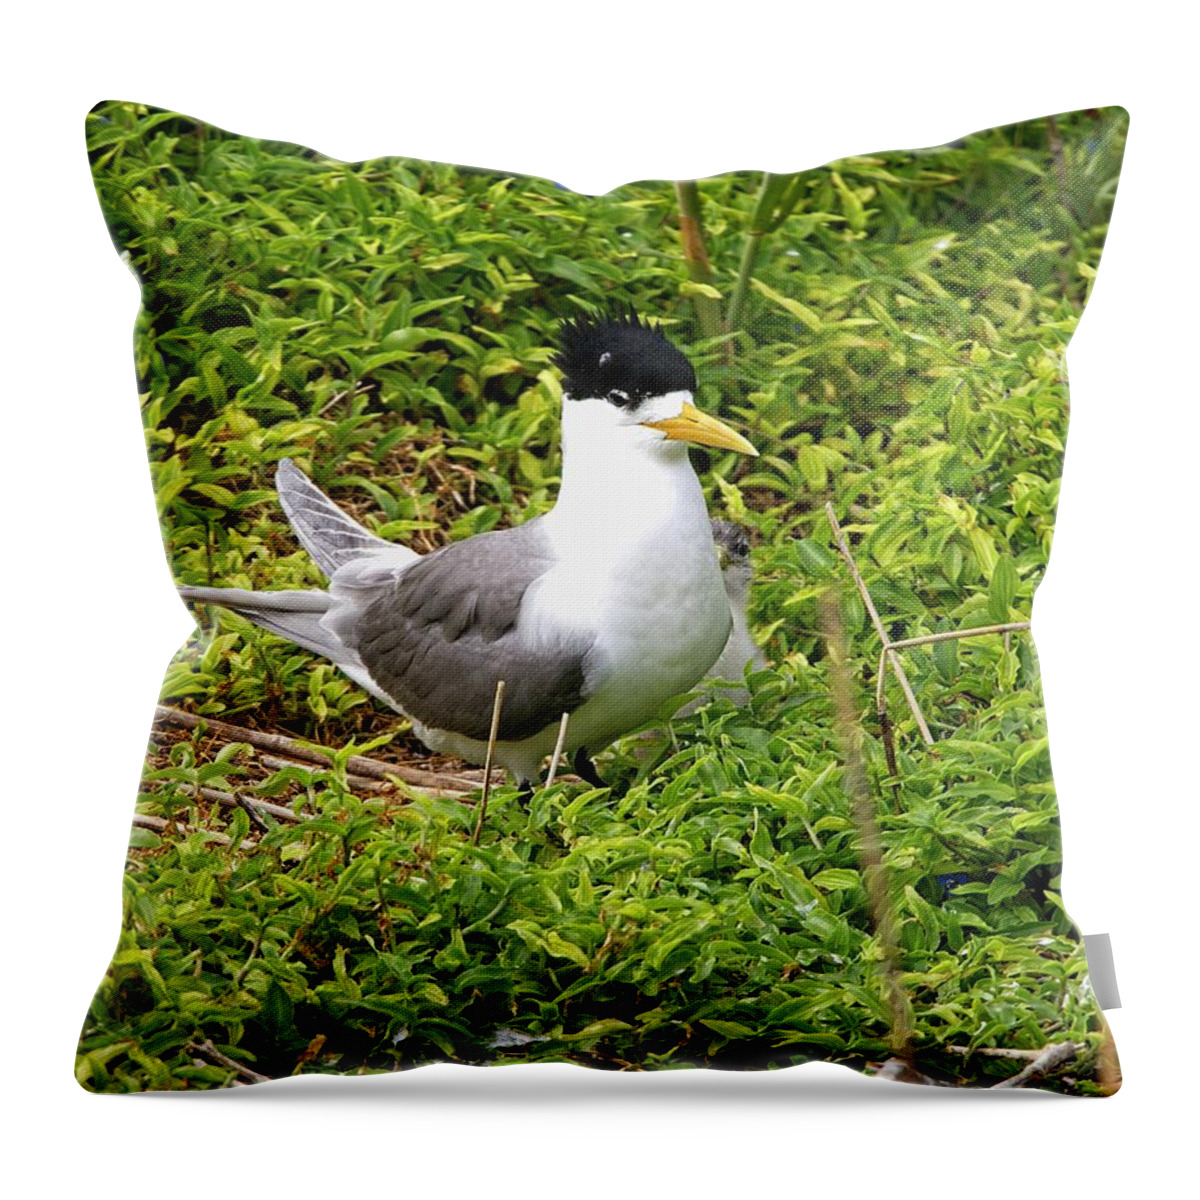 Australia Throw Pillow featuring the photograph Crested Tern and Chick, Australia by Steven Ralser